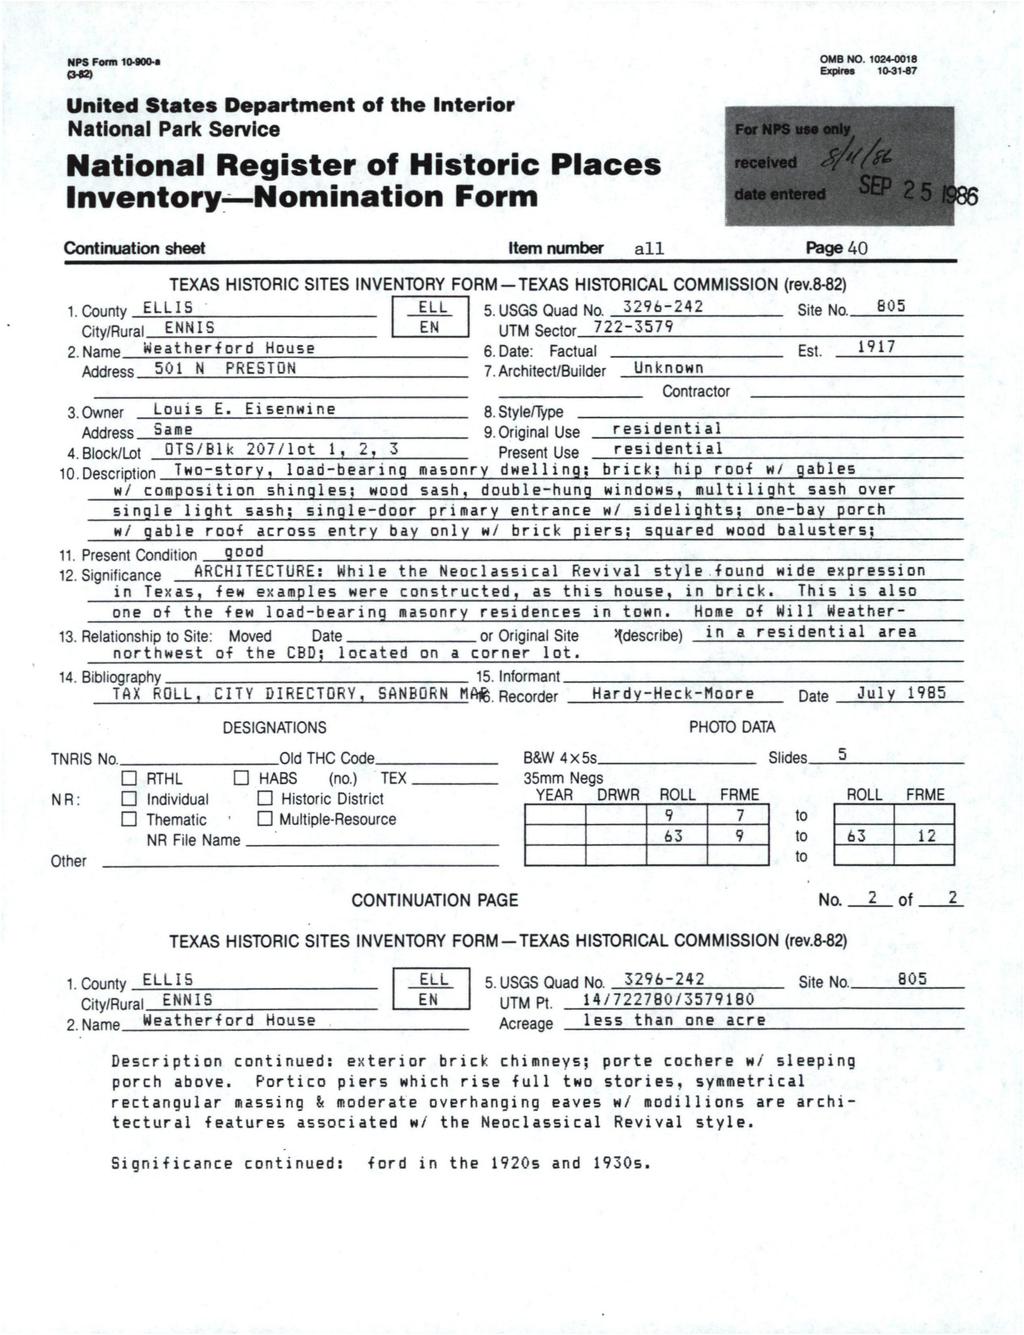 MPS Form 10.S00.I am United States Department off the Interior National Paric Service National Register off Historic Places Inventory Nomination Form For NPS HM only recefved OMB NO. 1024.